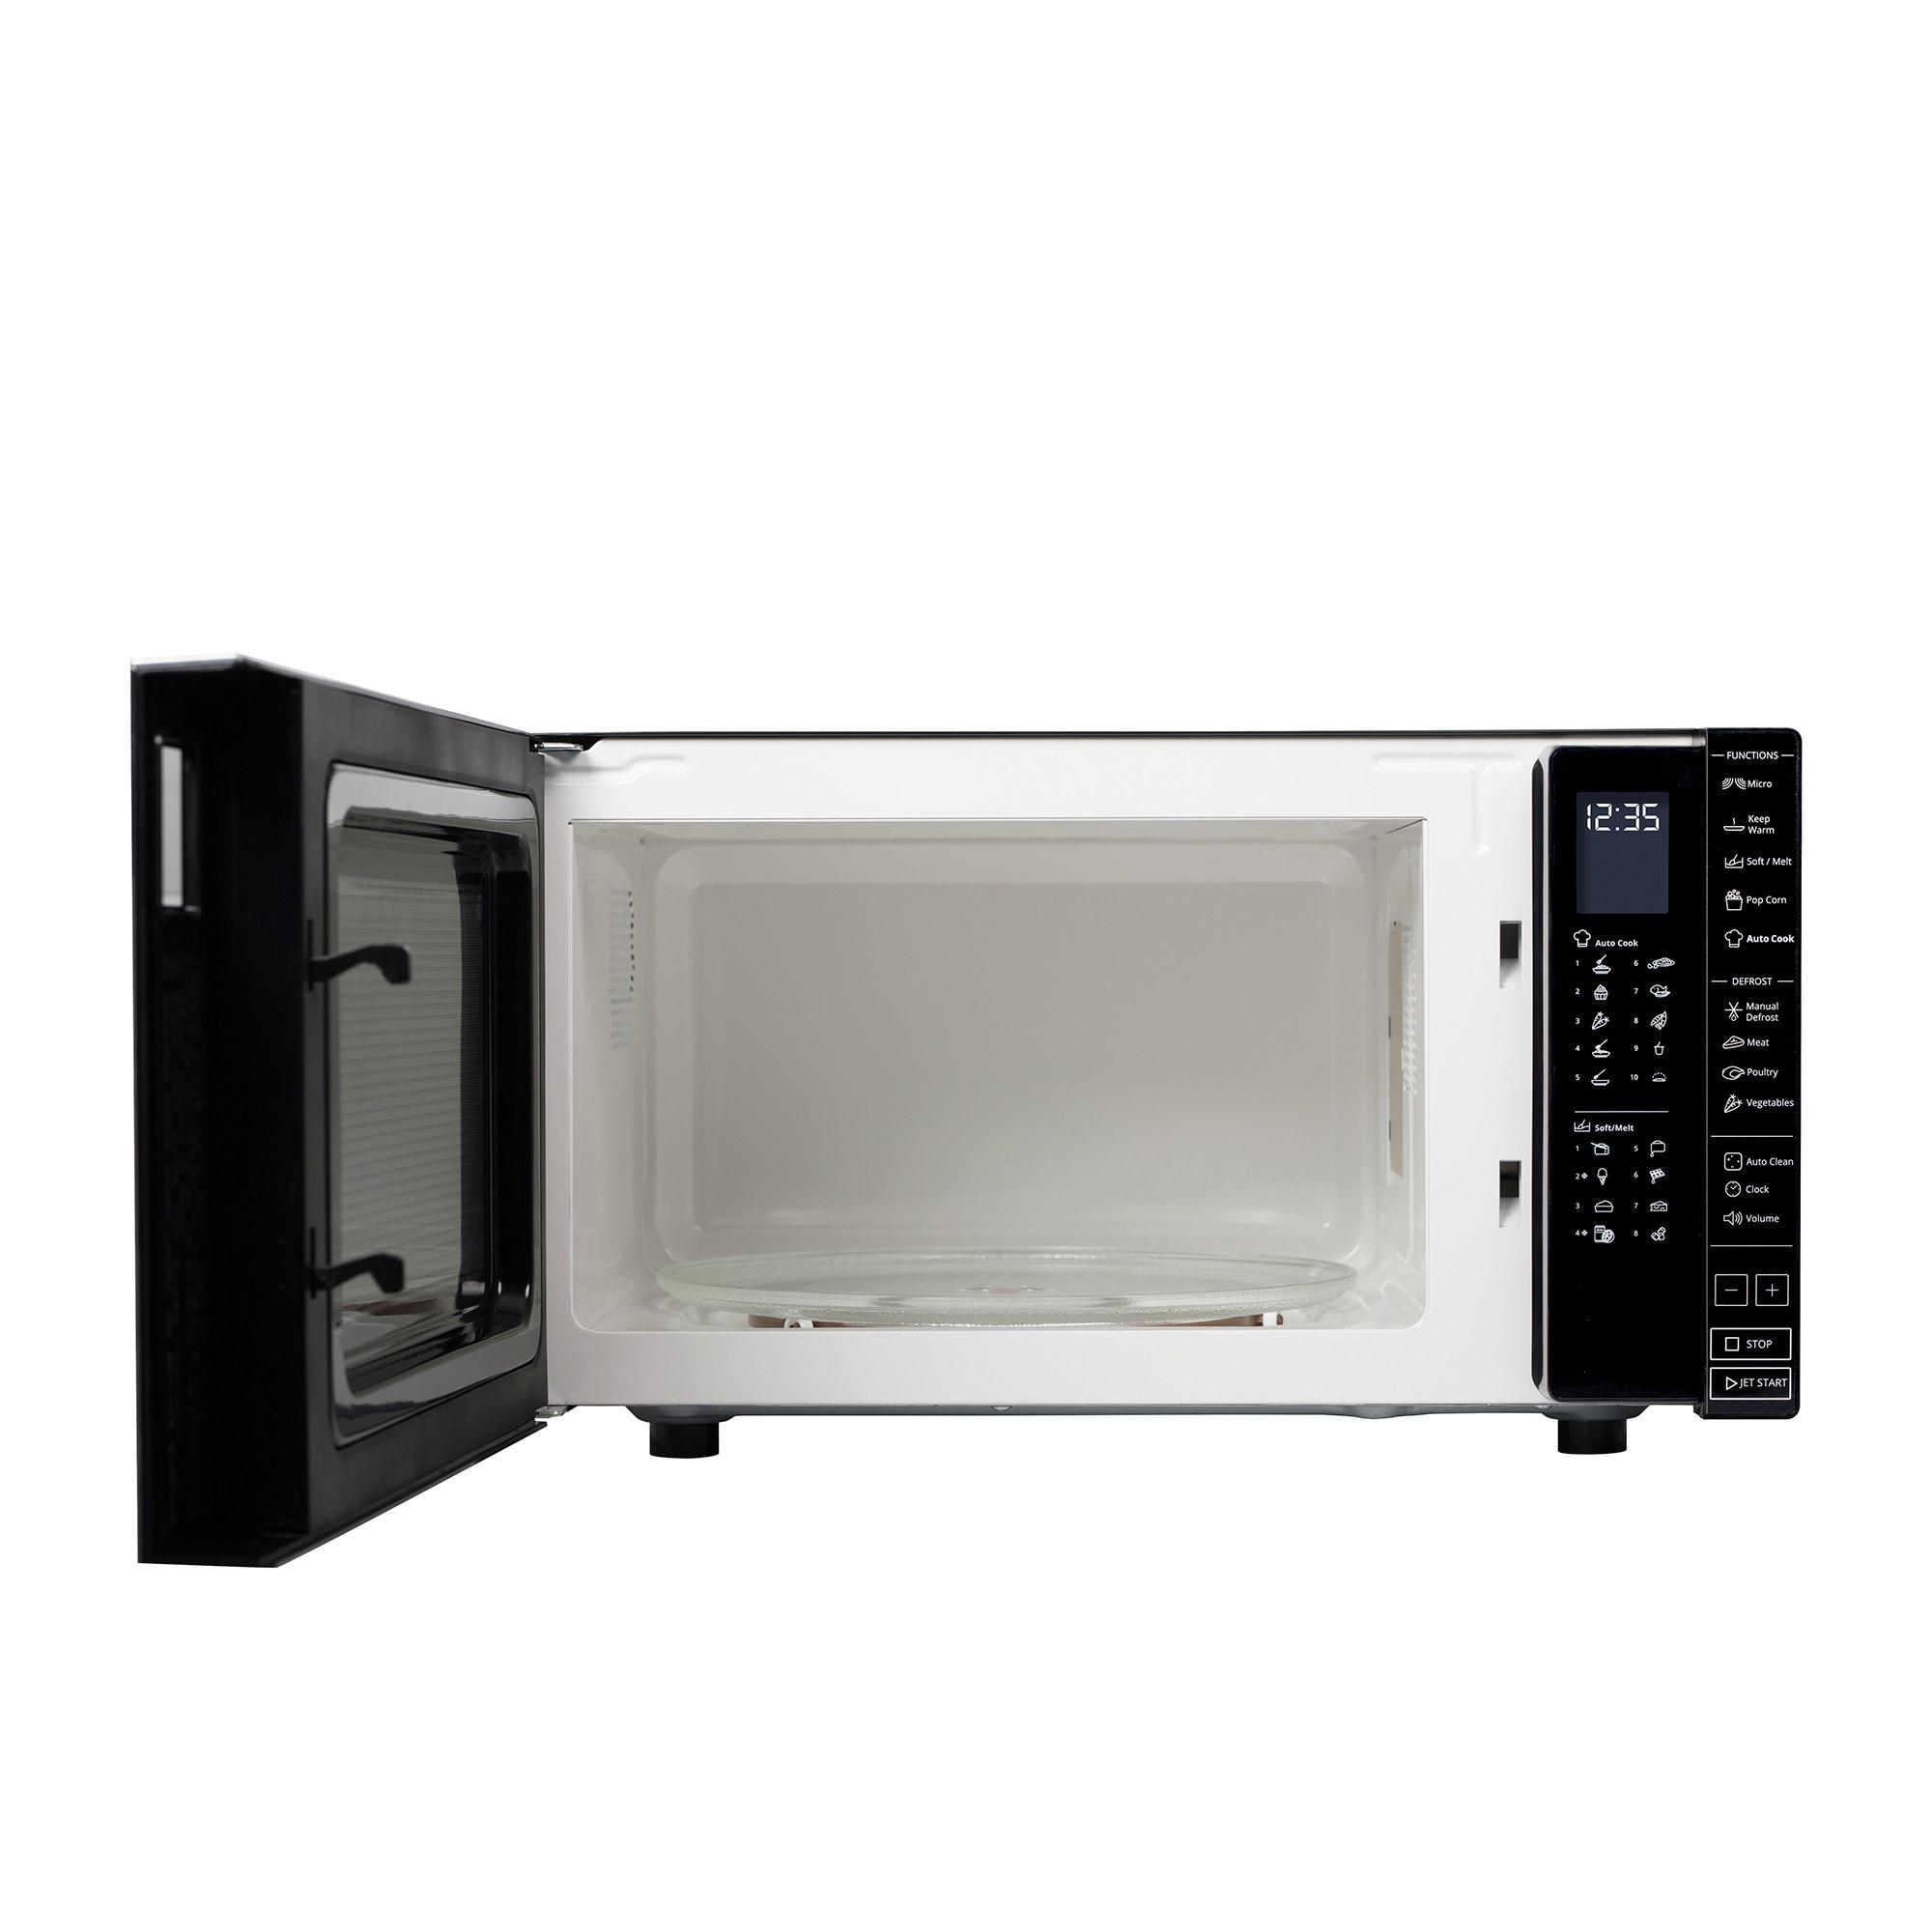 Whirlpool Microwave Oven 30L Black Image 4